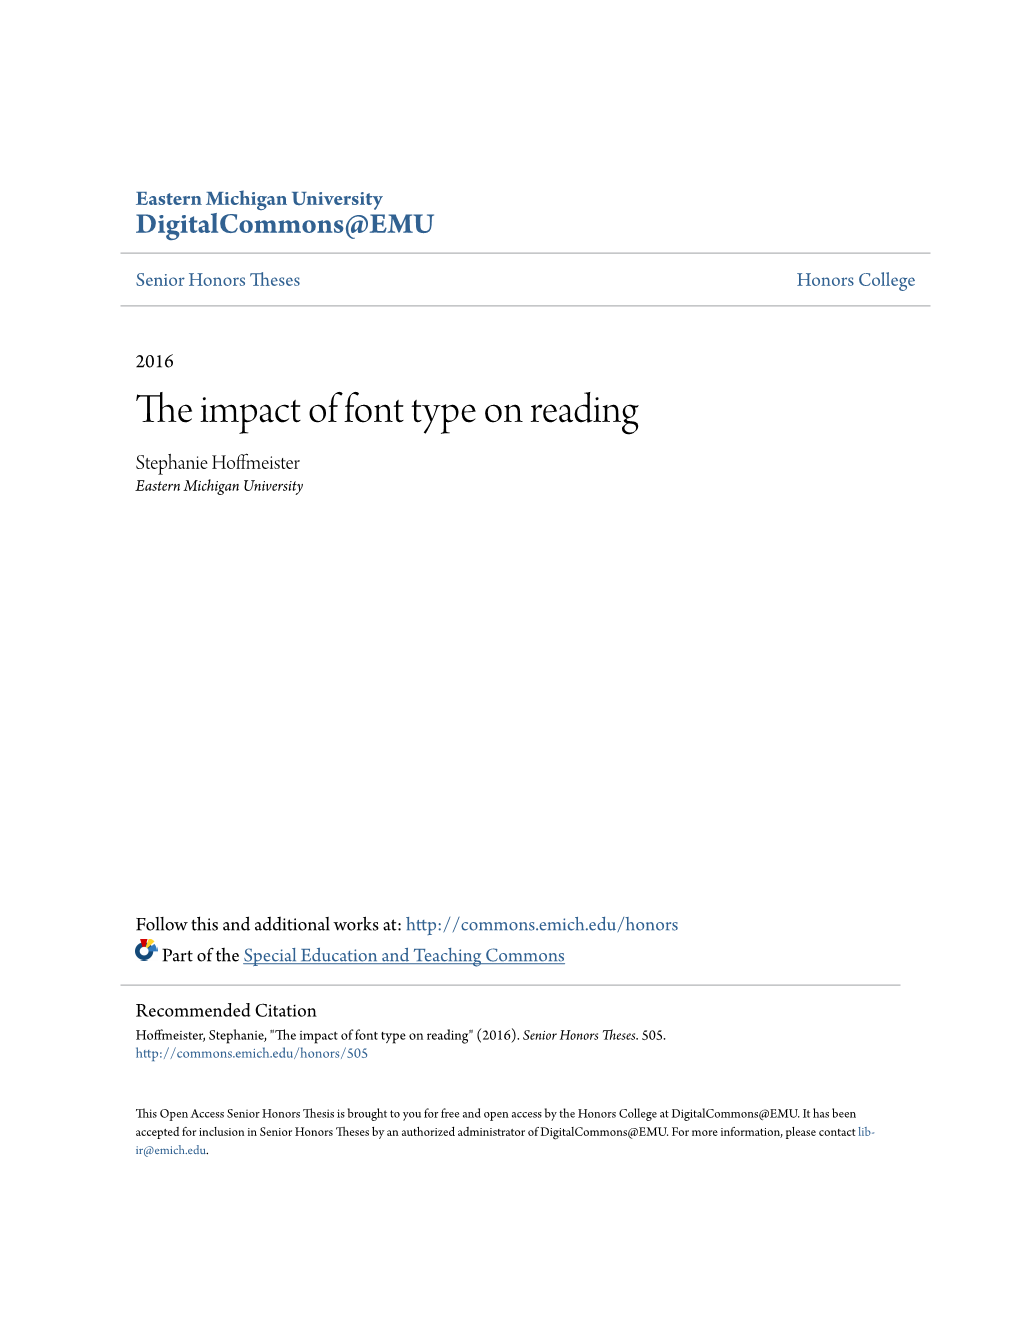 The Impact of Font Type on Reading Stephanie Hoffmeister Eastern Michigan University